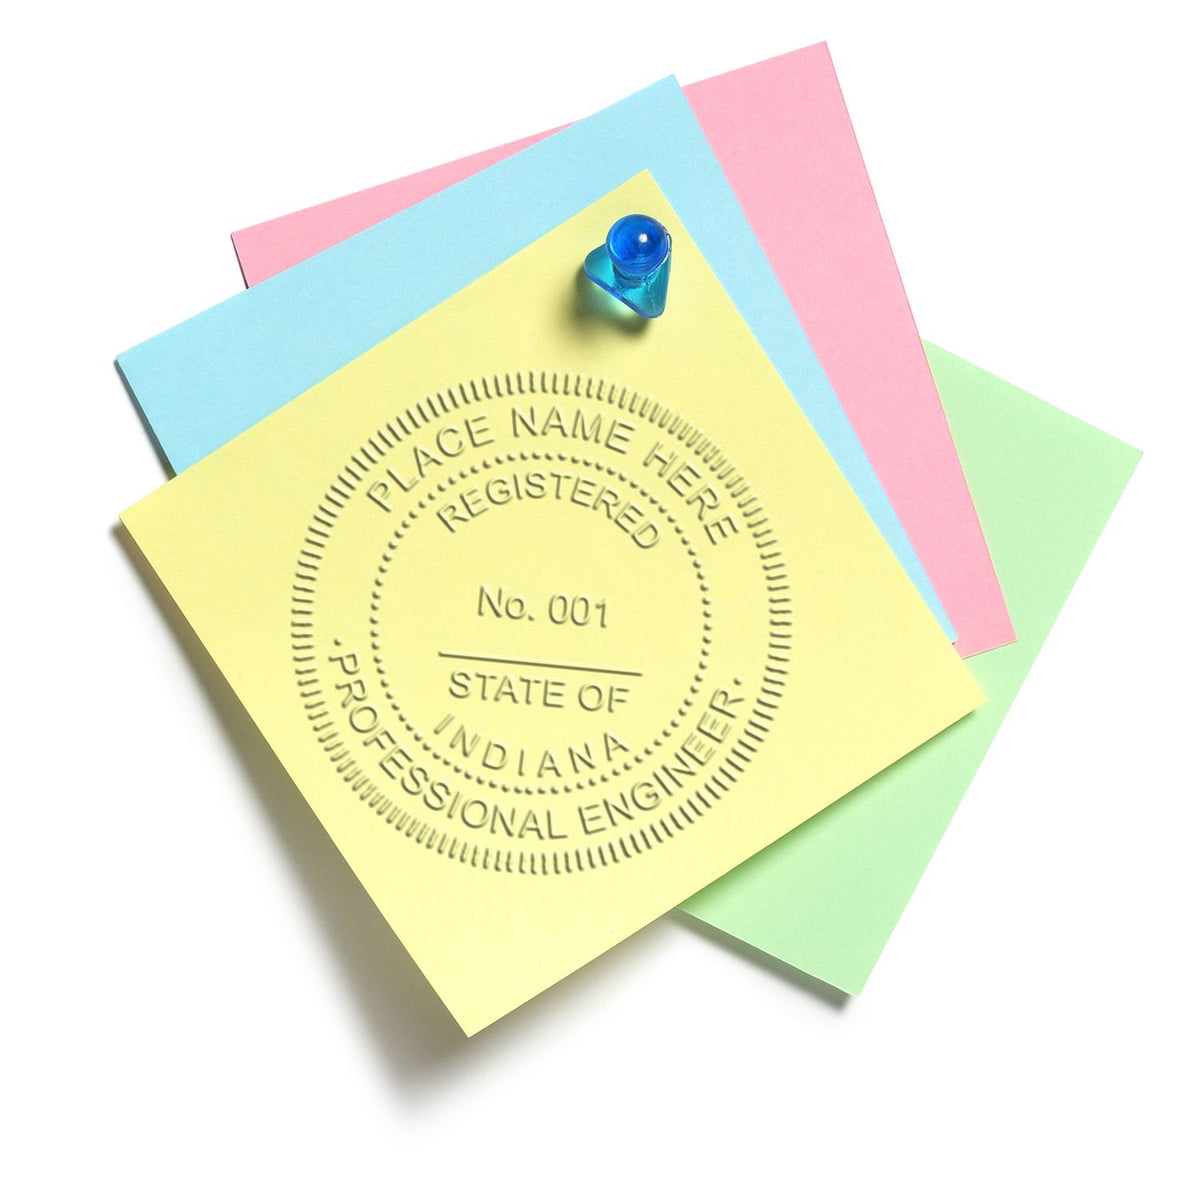 An in use photo of the Gift Indiana Engineer Seal showing a sample imprint on a cardstock